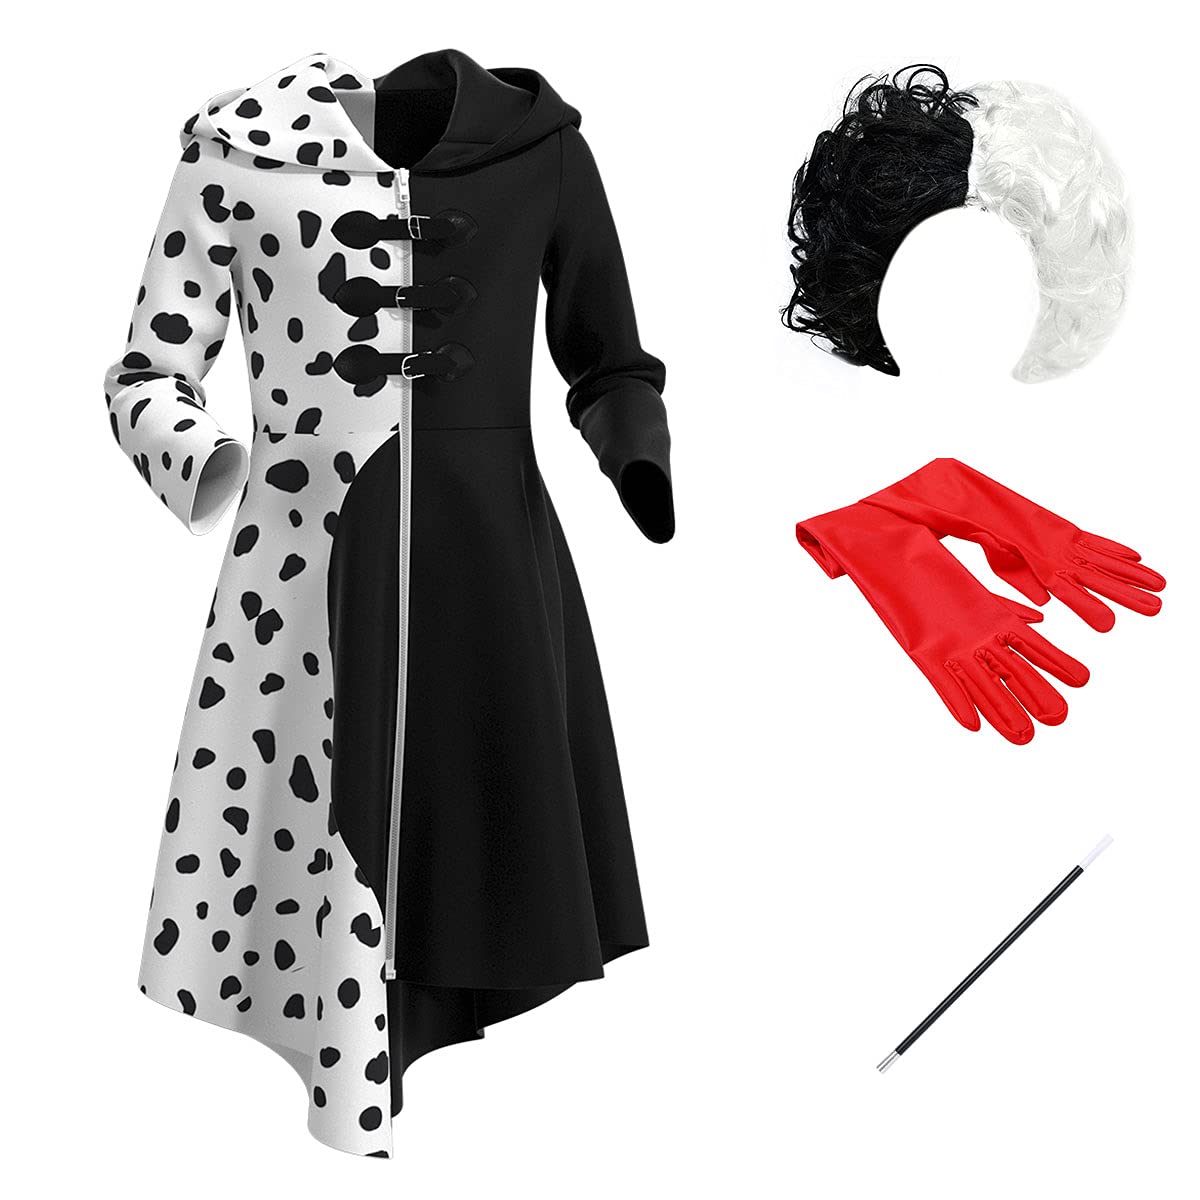 IDOPIP Cruella Deville Costume for Girls 101 Dalmatian Dog Halloween Cosplay Black White Spotted Coat Wig Cigarette Holder Movie Character Evil Fancy Dress up Carnival Party Outfits Coat 4-5 Years